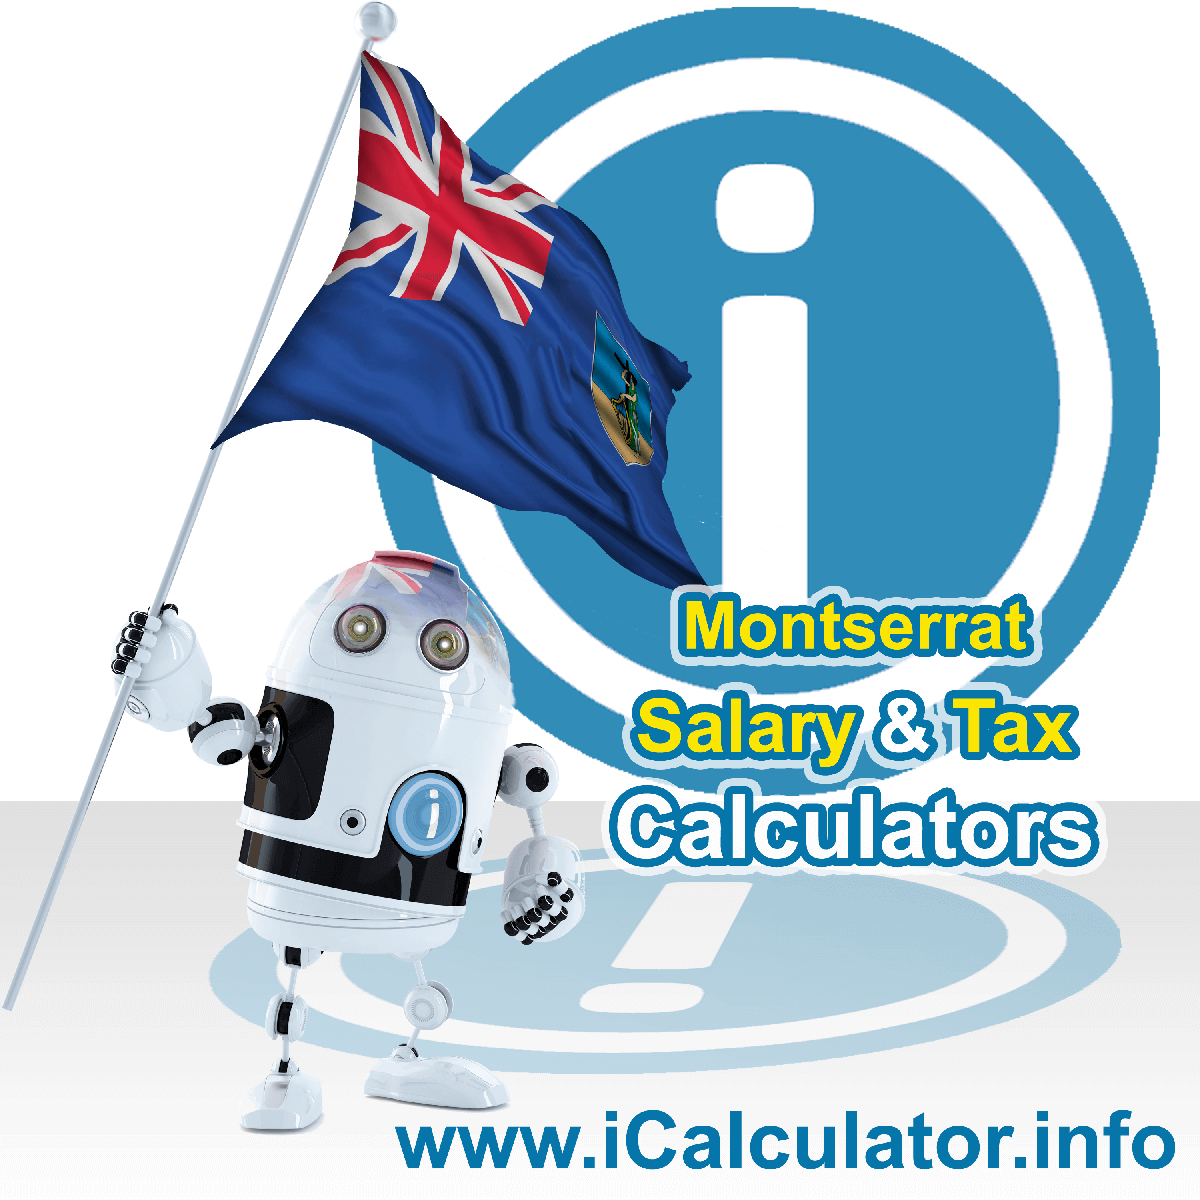 Montserrat Salary Calculator. This image shows the Montserratese flag and information relating to the tax formula for the Montserrat Tax Calculator